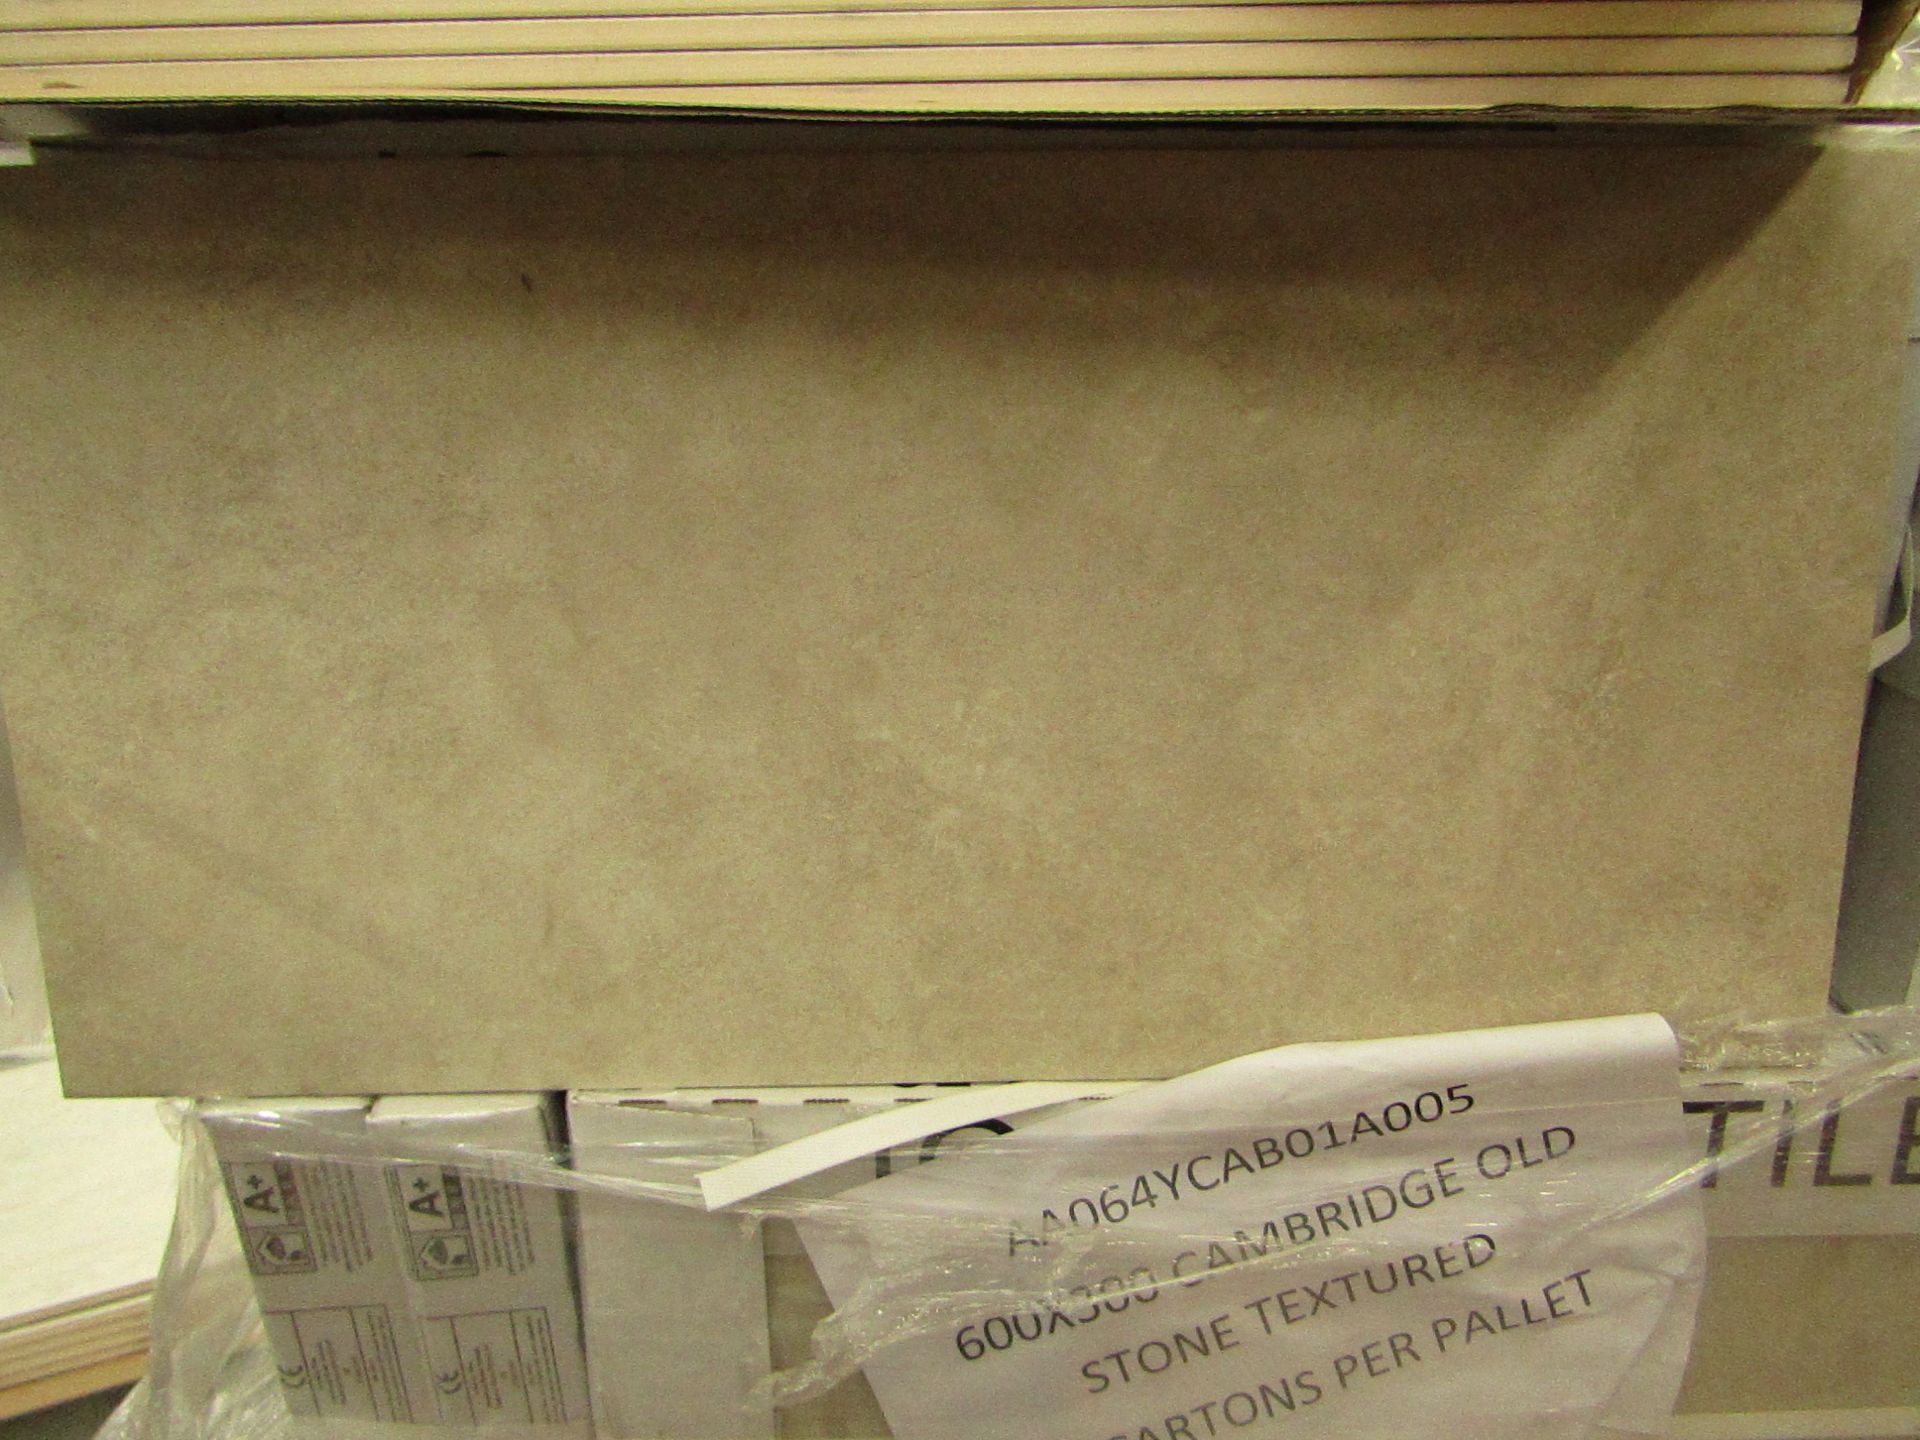 10x Packs of 5 Cambridge Old Stone textured 300x600 wall and Floor Tiles By Johnsons, New, the RRP